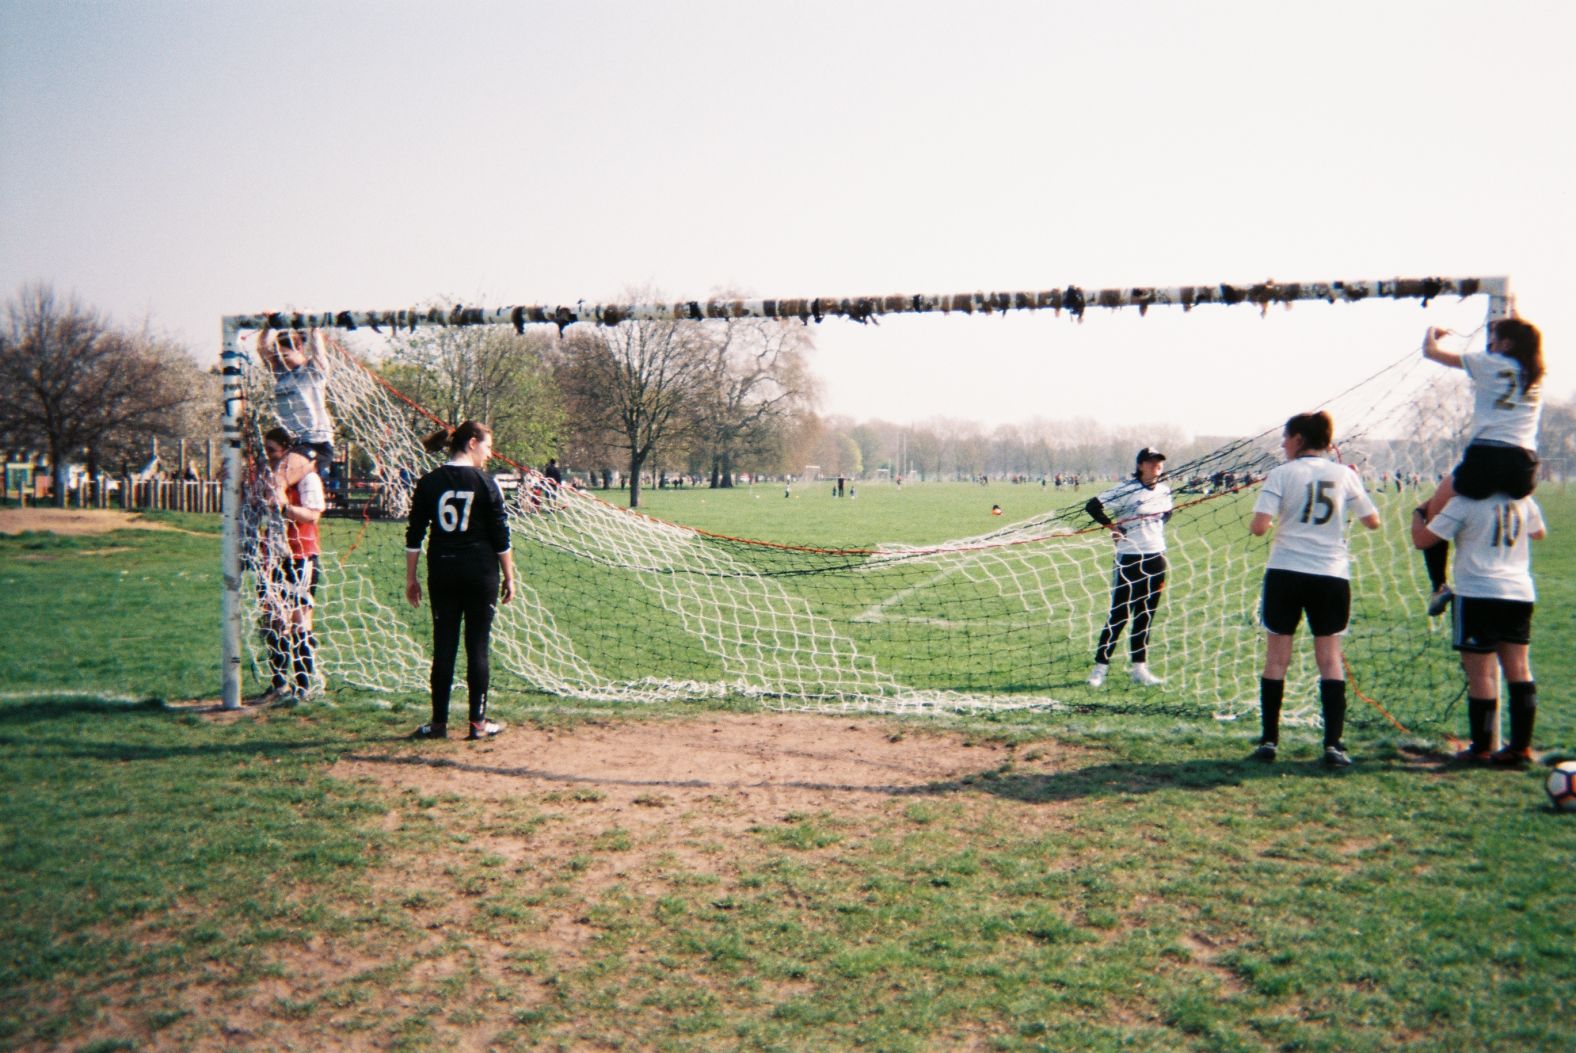 <strong>Photographer:</strong> Katy Castle, GDFC<br /><strong>Location:</strong> Clapham Common, London, UK<br /><br />"All the players are on each other's shoulders putting up the net. It so neatly depicts what I wanted to portray, GDFC as a community of players who support each other. I felt bad that I wasn't helping but I needed to be an observer so I could take the photo. I don't think I need to explain it more."